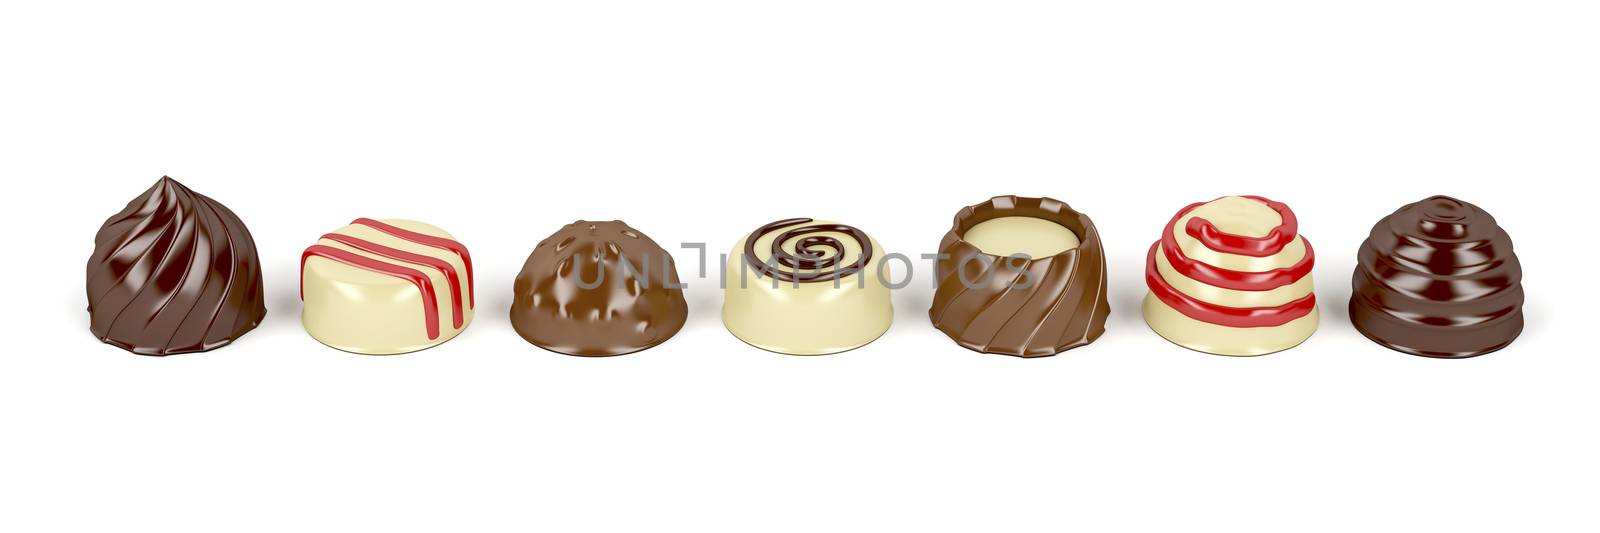 Chocolate pralines on white by magraphics